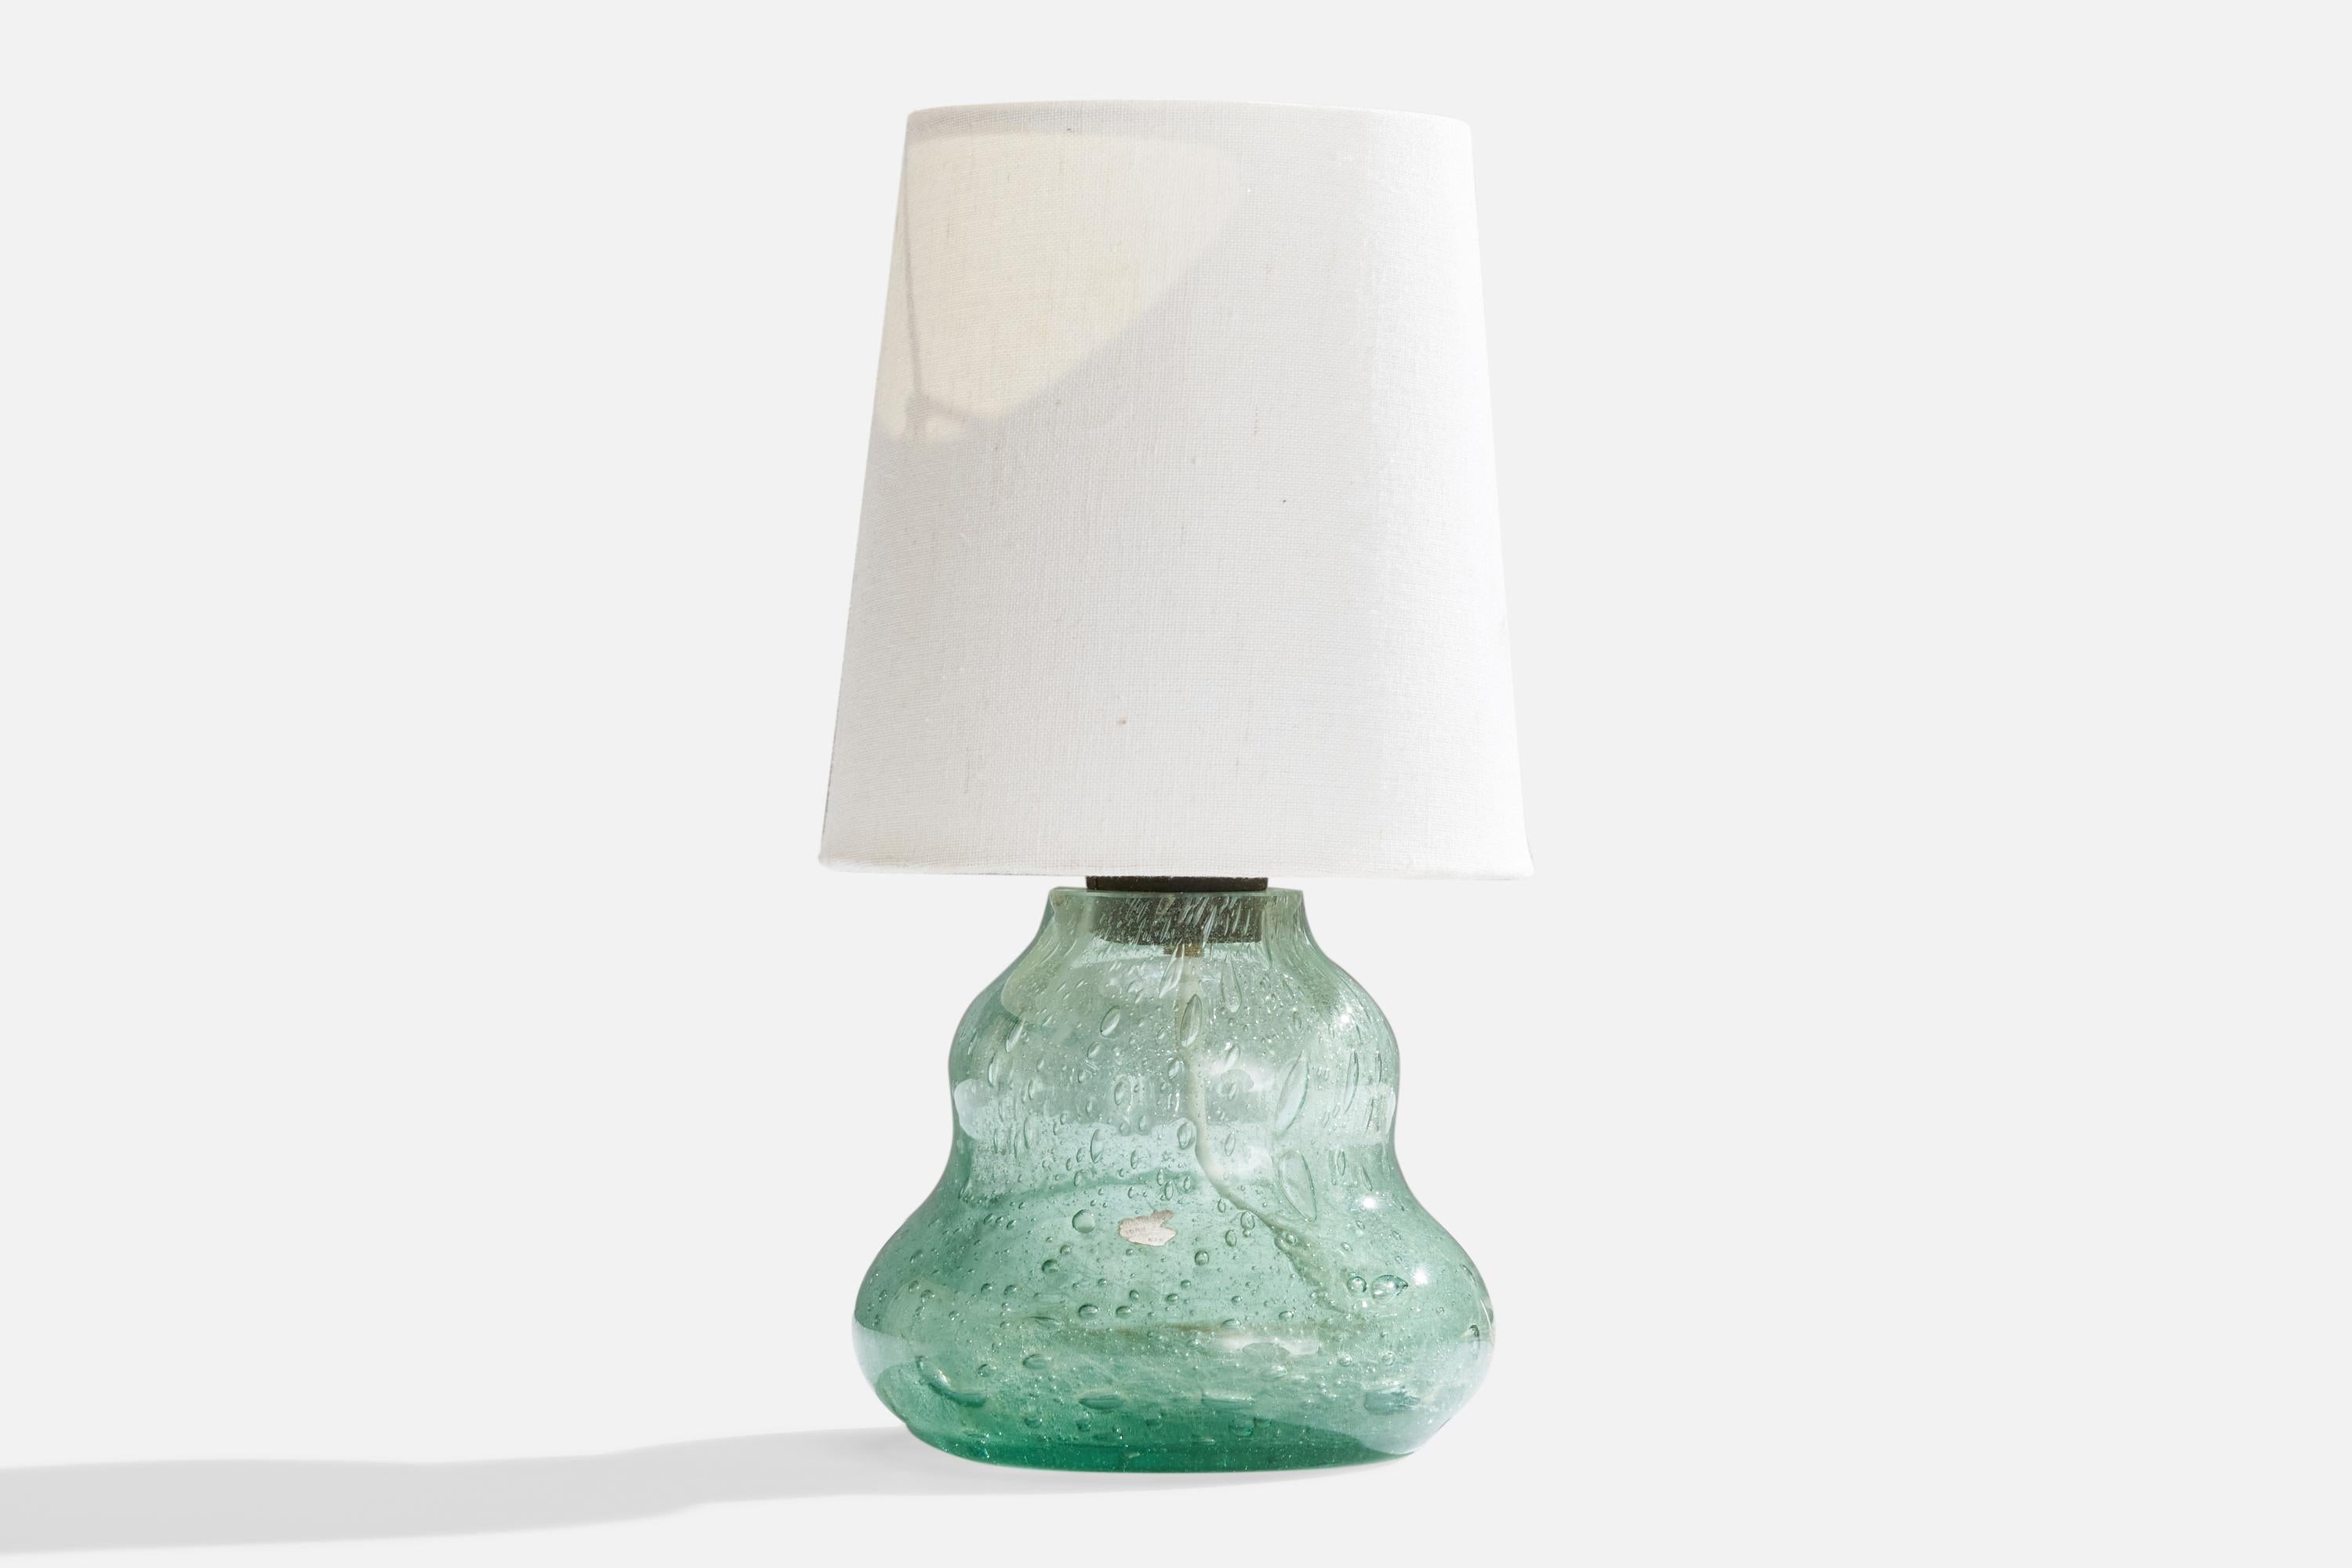 A blown glass and white fabric table lamp, designed by Ture Berglund and produced by Skansen, Glass, Sweden, c. 1940s.

Overall Dimensions (inches): 11.5”  H x 5.5”  D
Stated dimensions include shade.
Bulb Specifications: E-26 Bulb
Number of